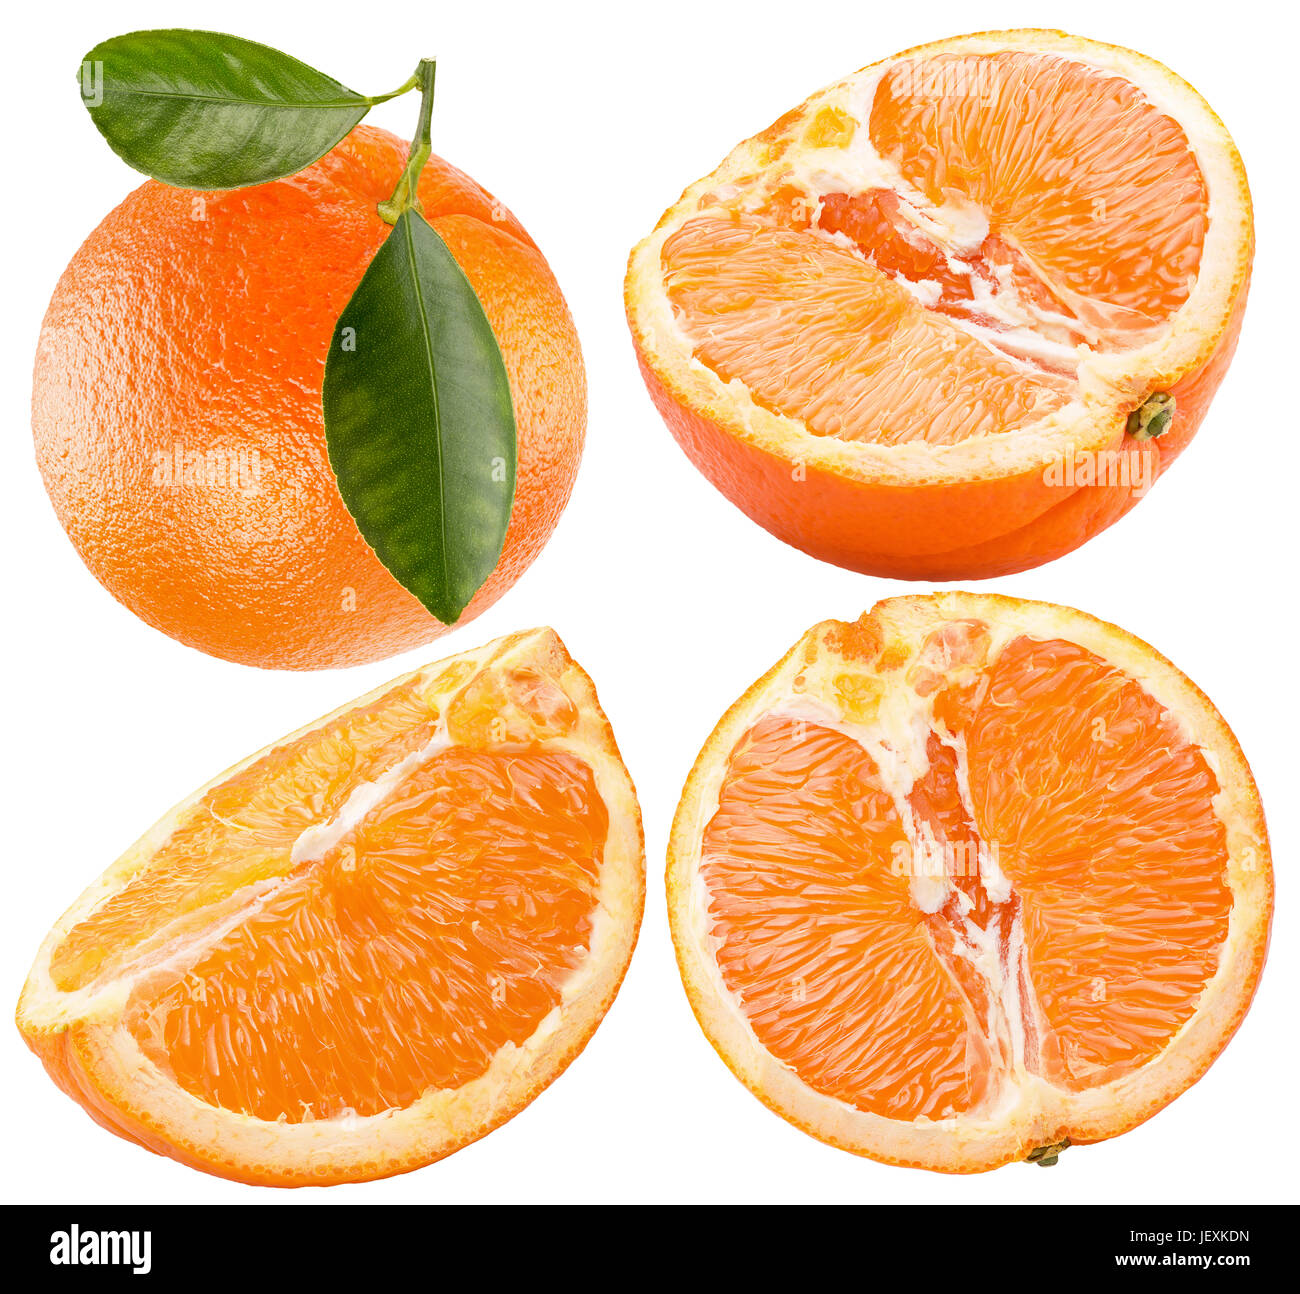 collection of oranges isolated on a white background. Stock Photo